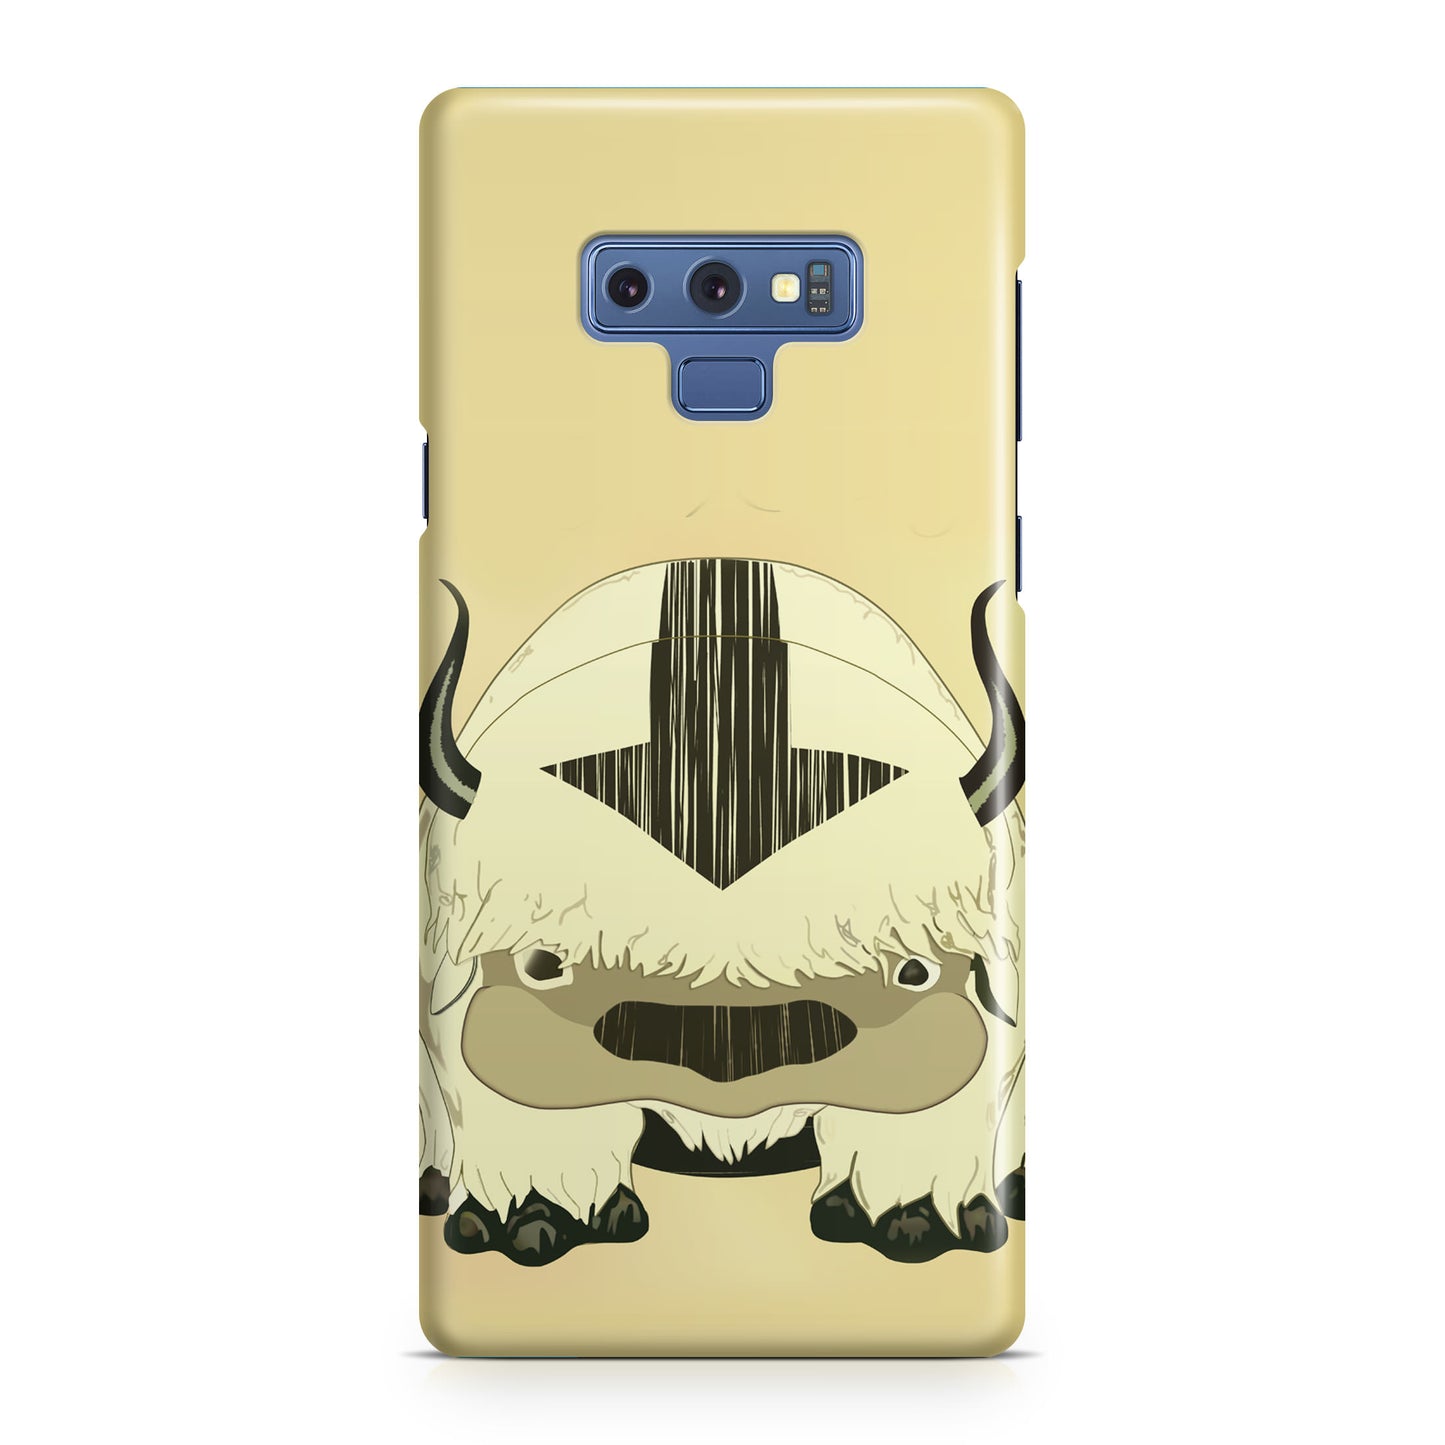 Appa Avatar The Last Airbender Galaxy Note 9 Case